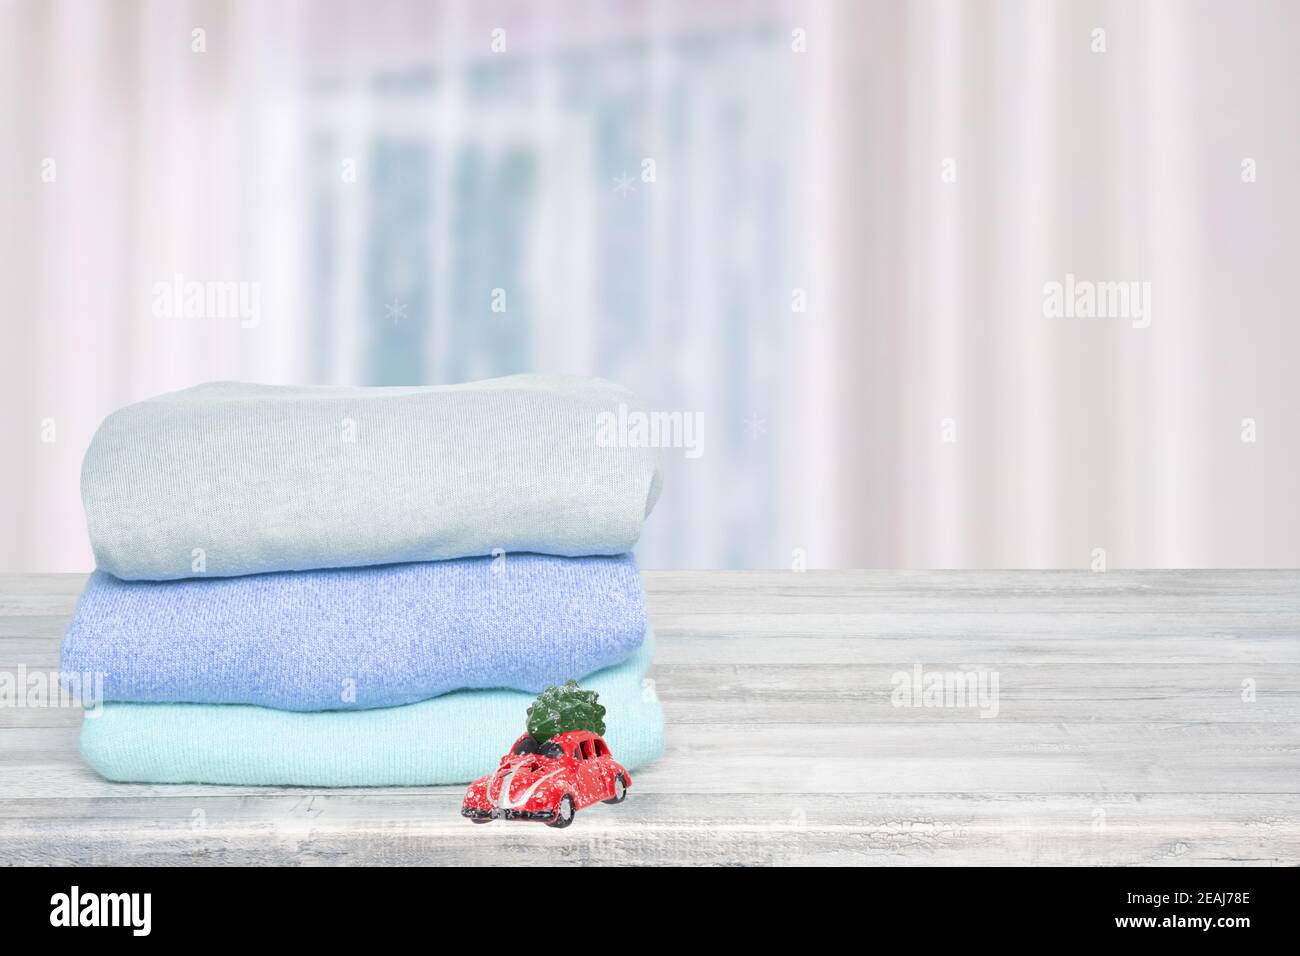 Template for christmas sale. Pile of colorful knitted cozy warm cashmere sweaters  on a wooden table against abstract blurred bright curtain background. Autumn and spring clothing with space for display product montage. Stock Photo